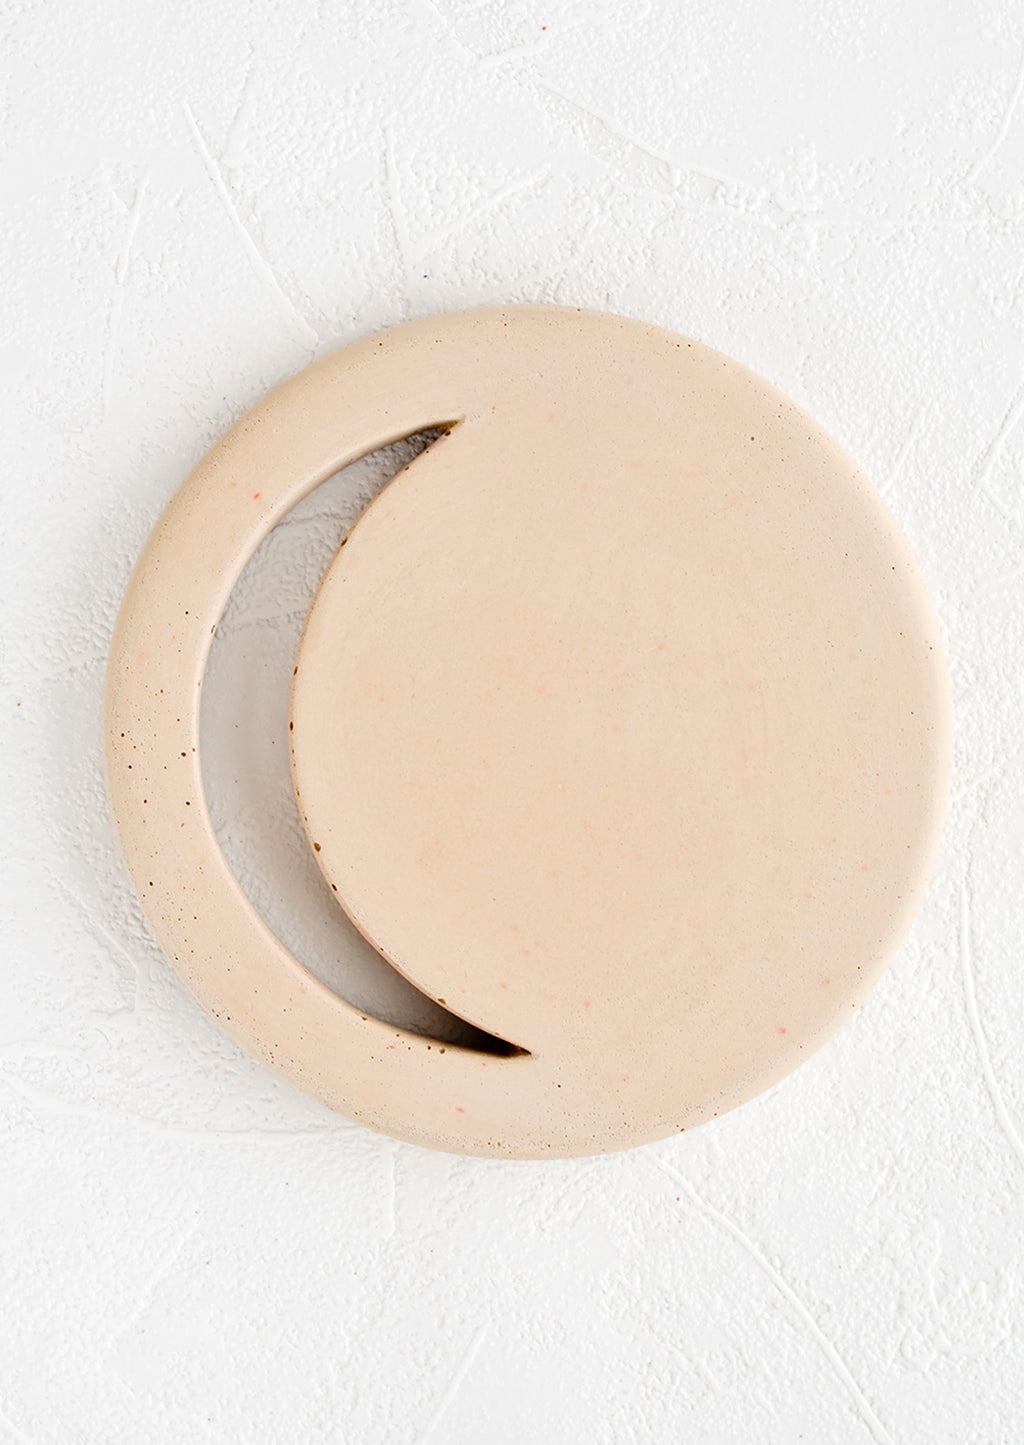 Straw: A round concrete trivet in straw color with crescent moon shaped cutout.